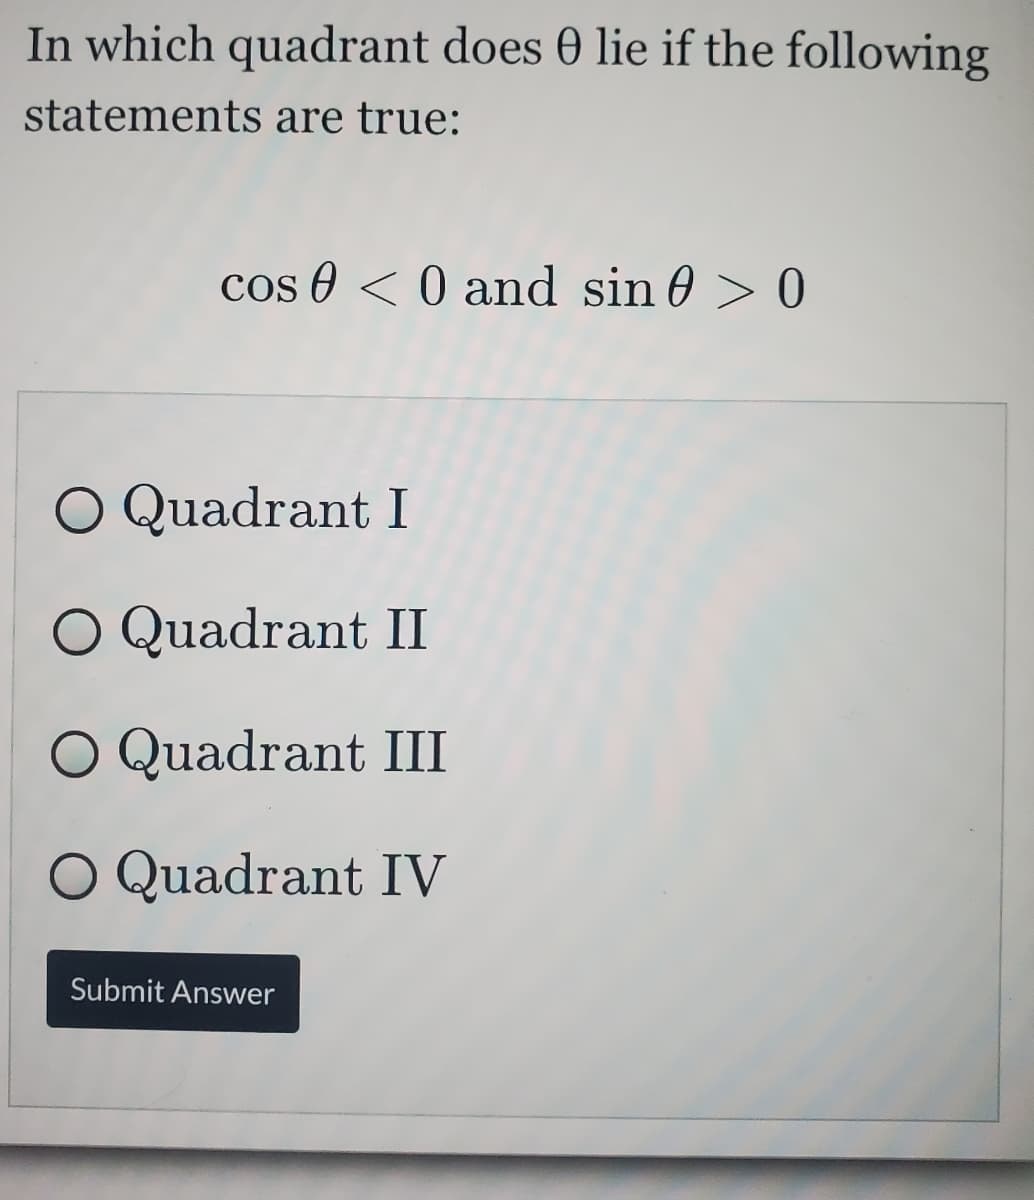 In which quadrant does 0 lie if the following
statements are true:
cos 0 < 0 and sin 0 > 0
O Quadrant I
O Quadrant II
O Quadrant III
O Quadrant IV
Submit Answer
